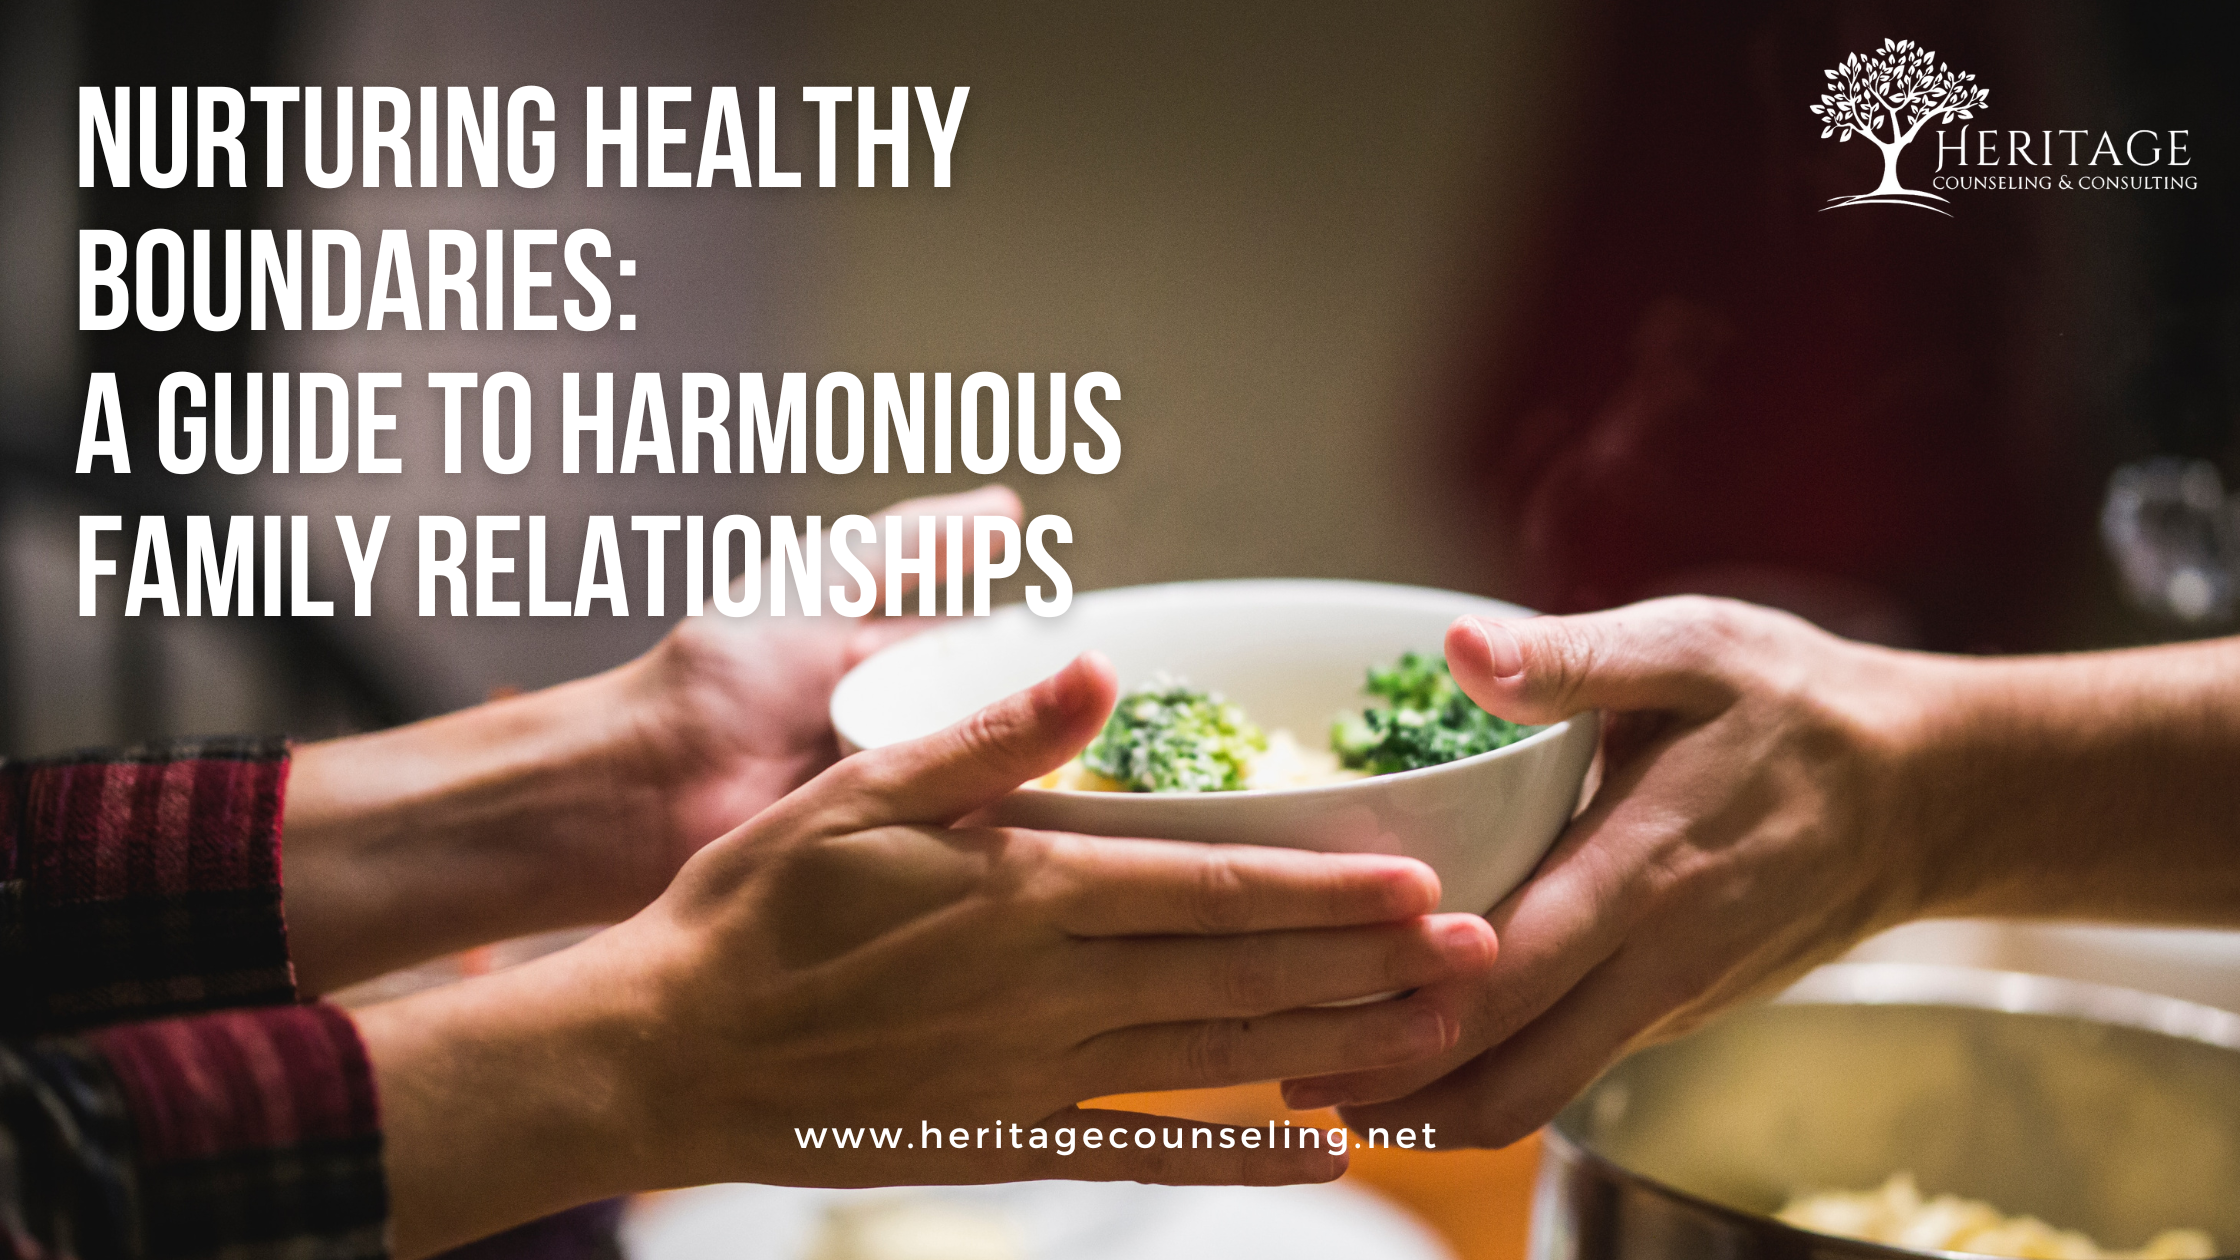 Nurturing Healthy Boundaries:  A Guide to Harmonious Family Relationships